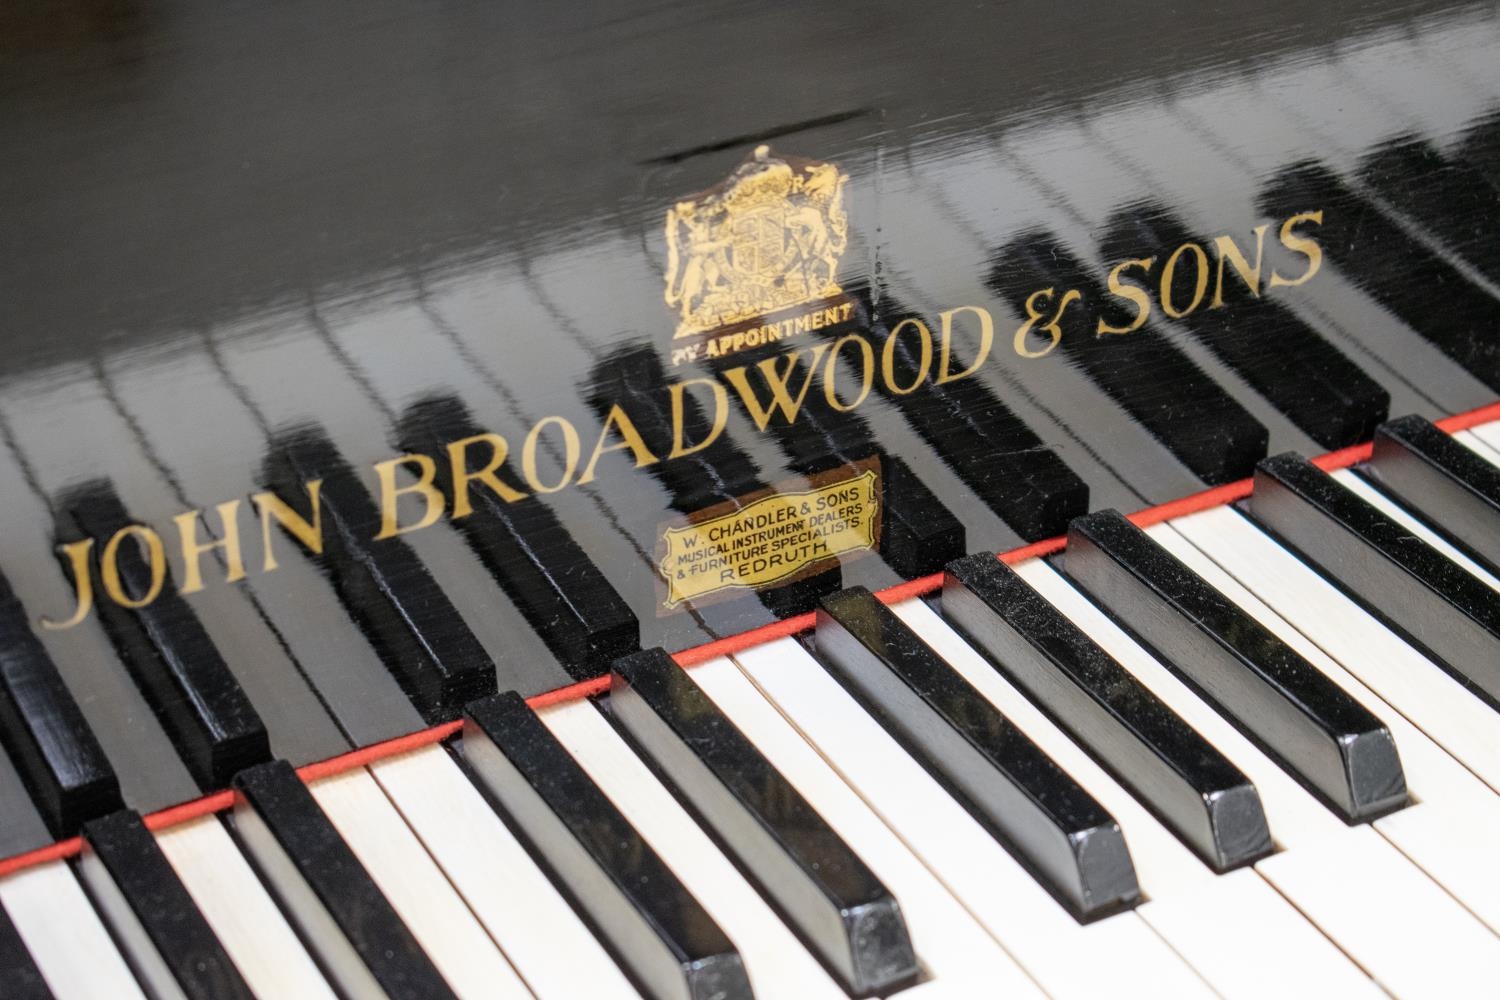 BABY GRAND PIANO BY JOHN BROADWOOD AND SONS, 20th century ebonised, 97cm H x 143cm x 130cm. - Image 5 of 12